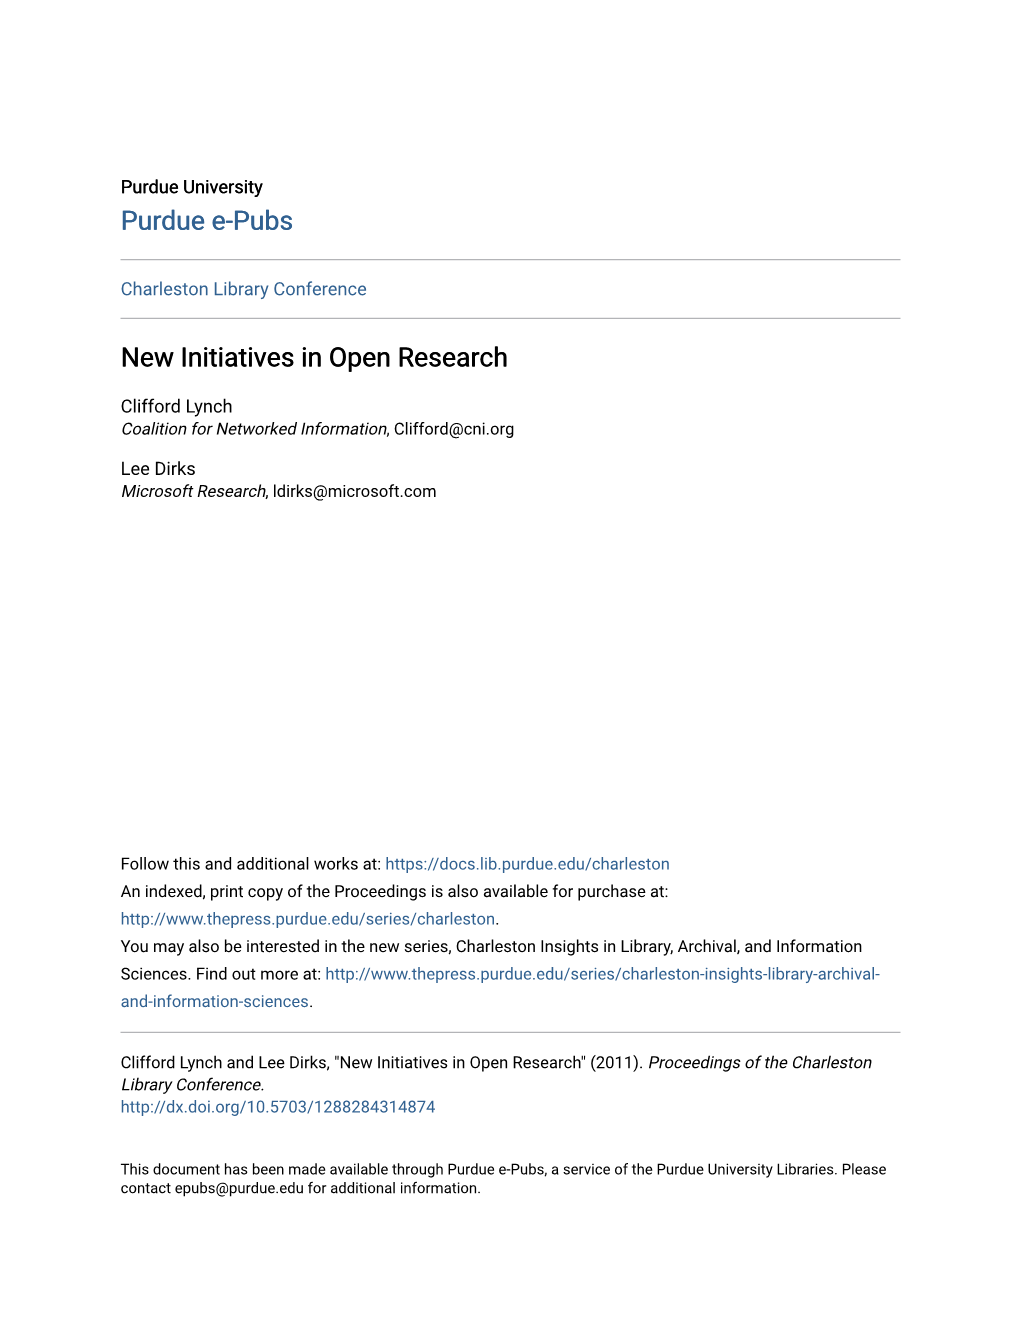 New Initiatives in Open Research